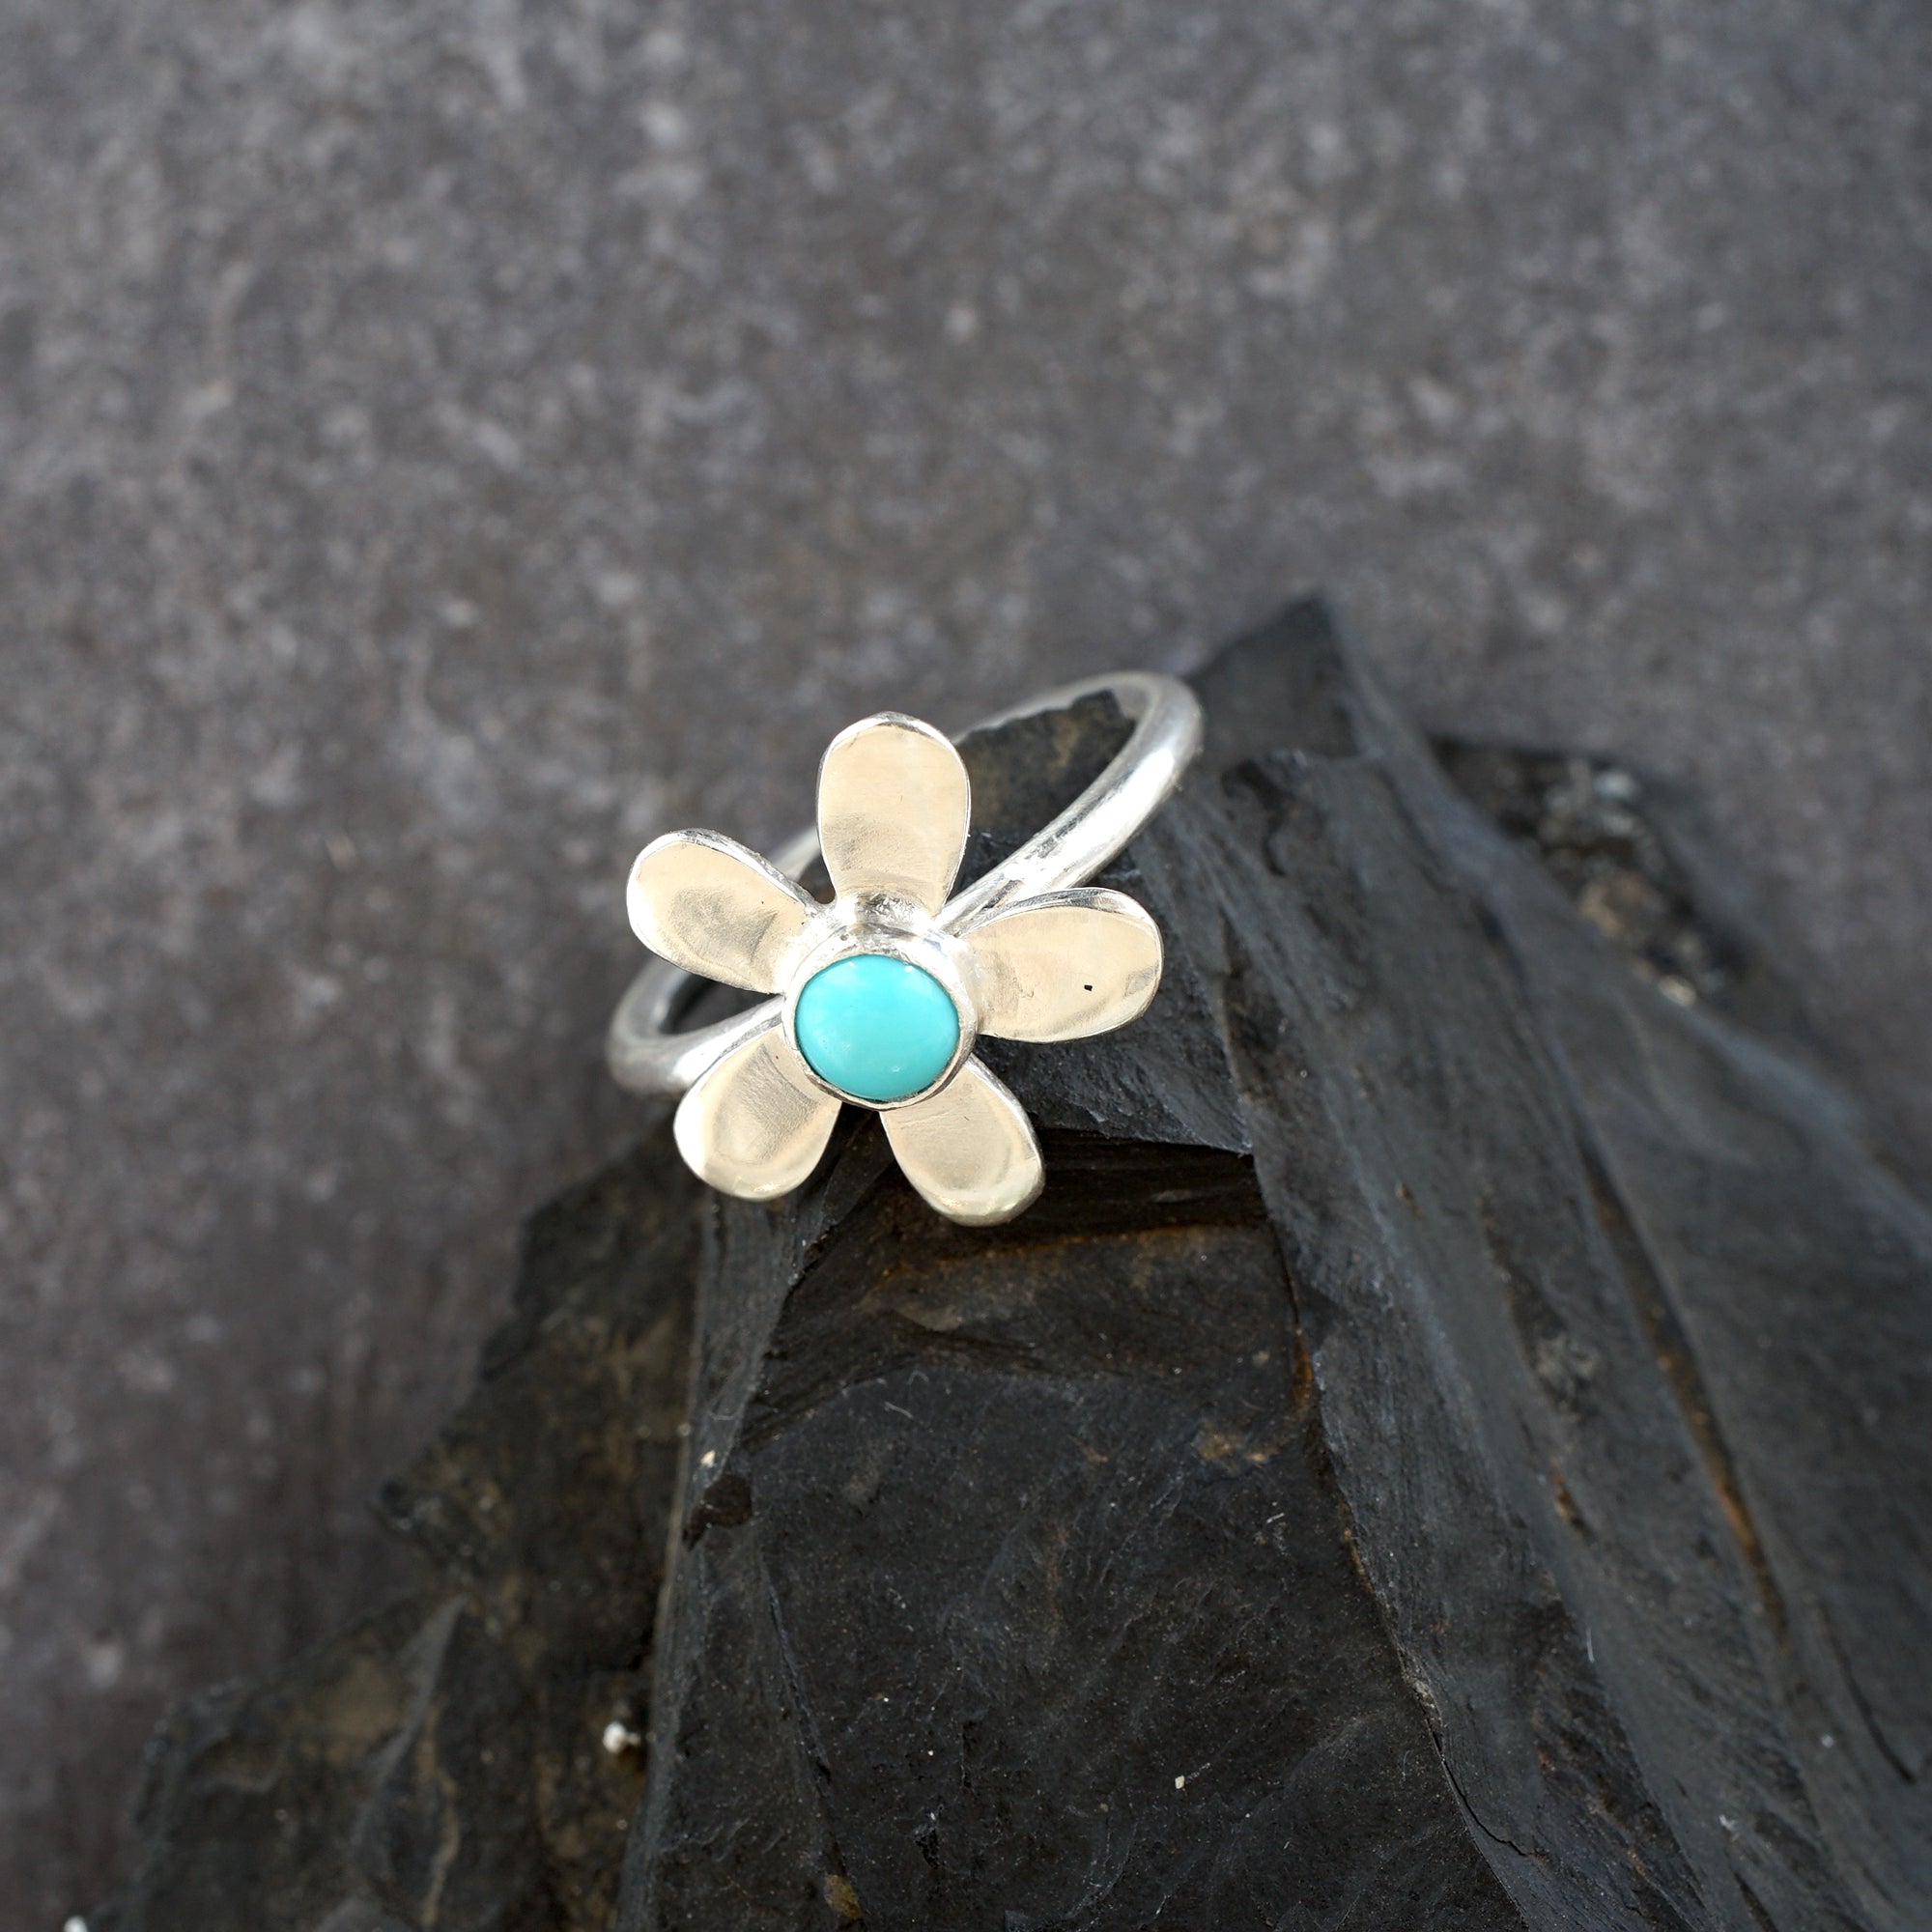 Daisy Chain sterling silver & turquoise ring from Angela Kelly Jewellery Enniskillen Fermanagh